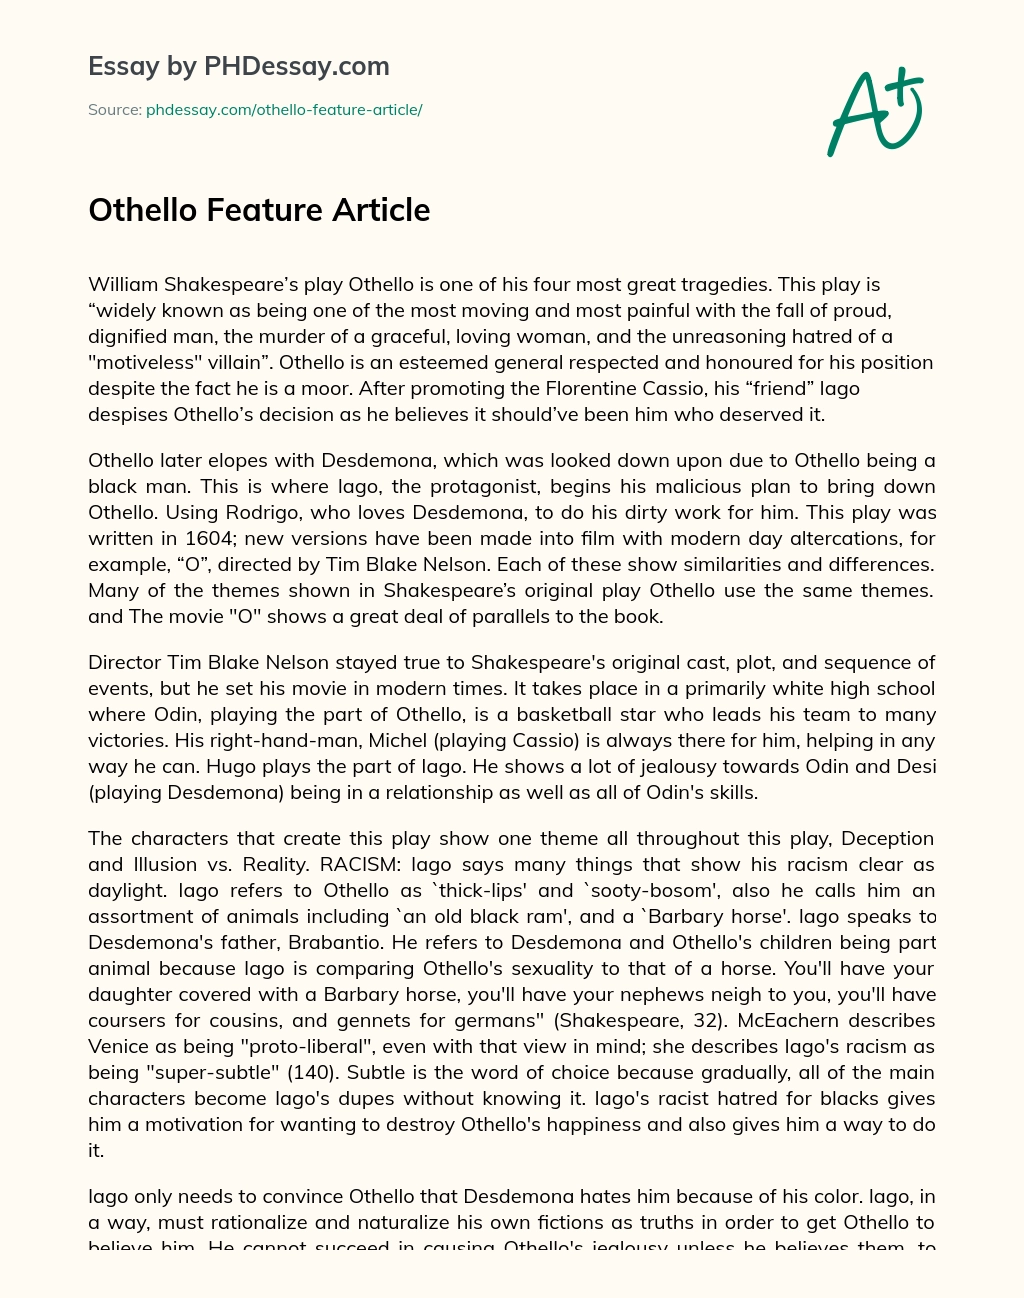 Othello Feature Article essay